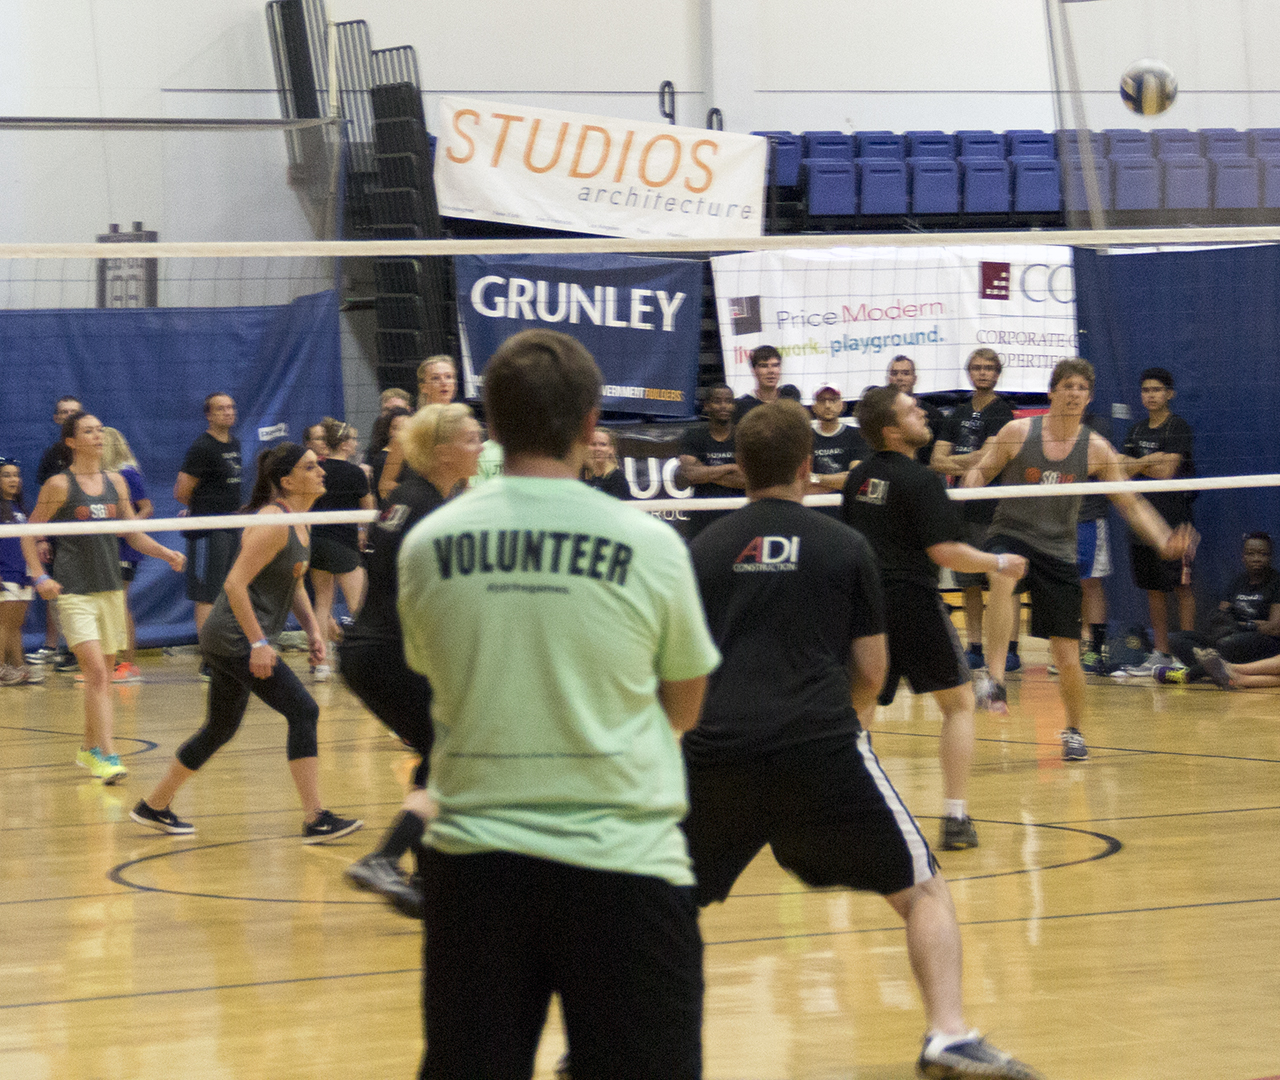 Students playing volleyball at the 2016 Real Estate Games